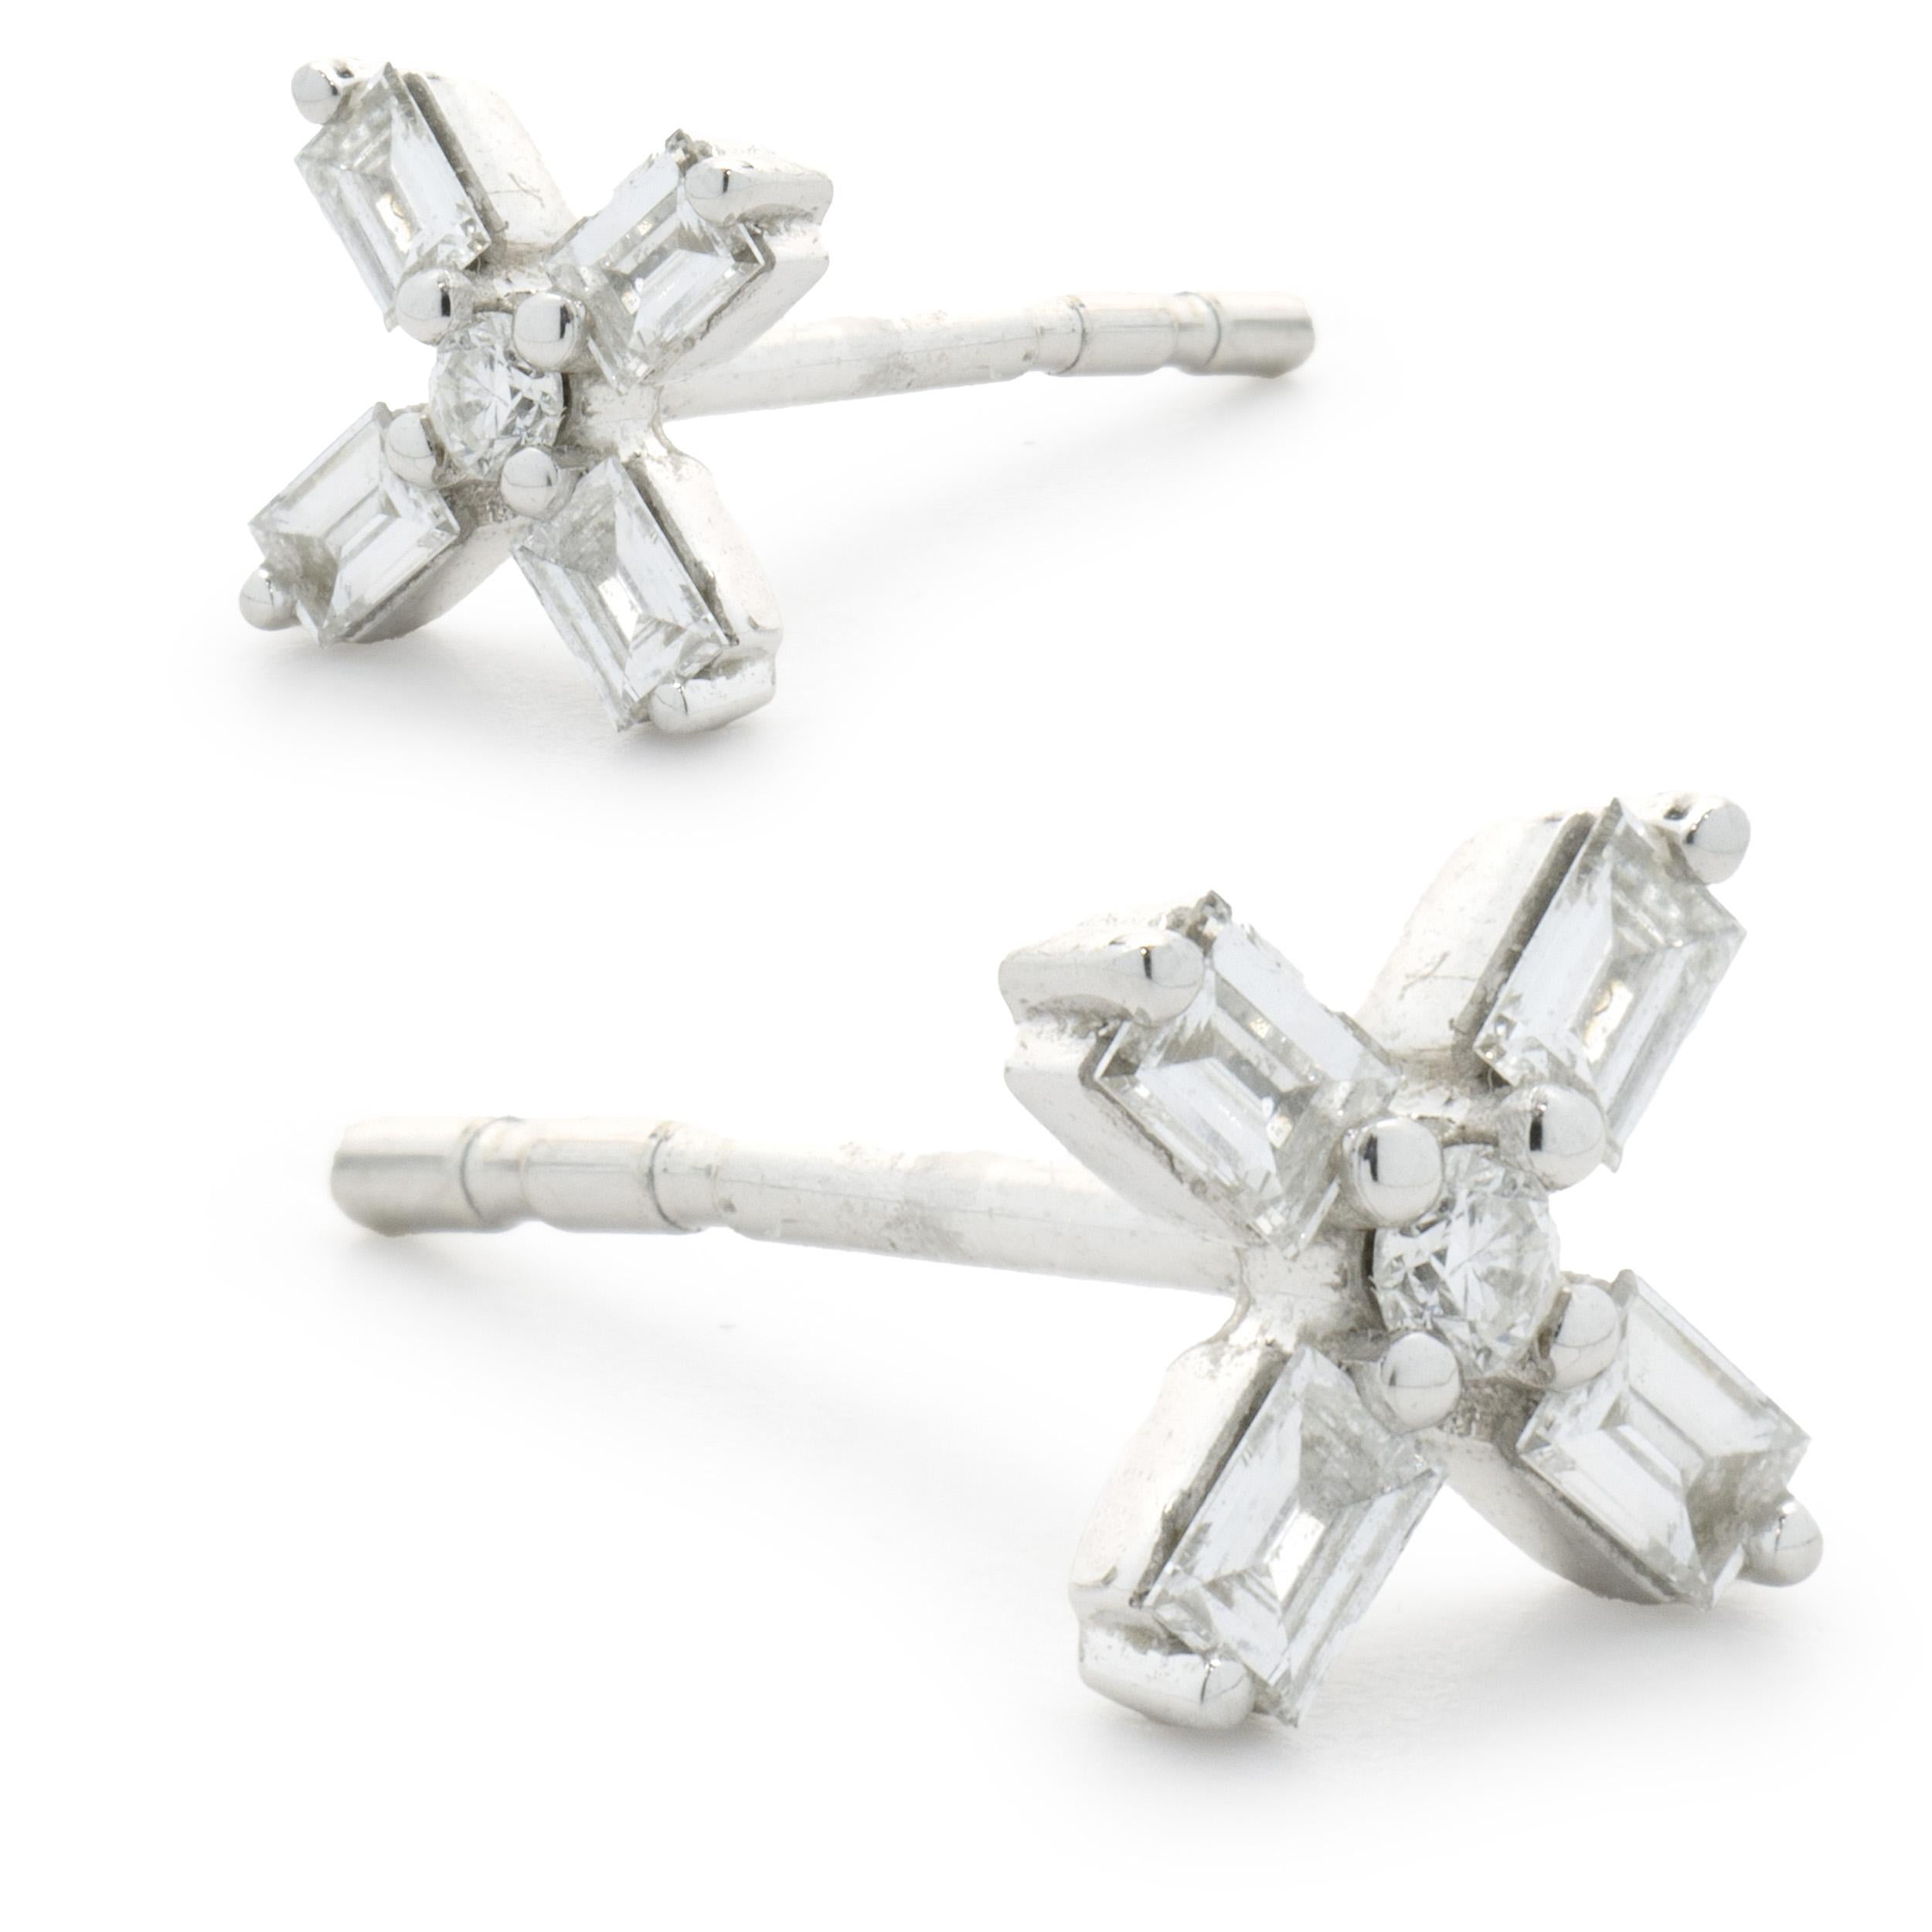 Material: 14k white gold
Diamonds: 8 baguette cut = 0.24cttw
Color: G
Clarity: SI1
Diamonds: 2 round cut = 0.03cttw
Color: G
Clarity: SI1
Dimensions: earrings measure approximately 13 x 6mm in diameter
Fastenings: friction
Weight: 1.15 grams
